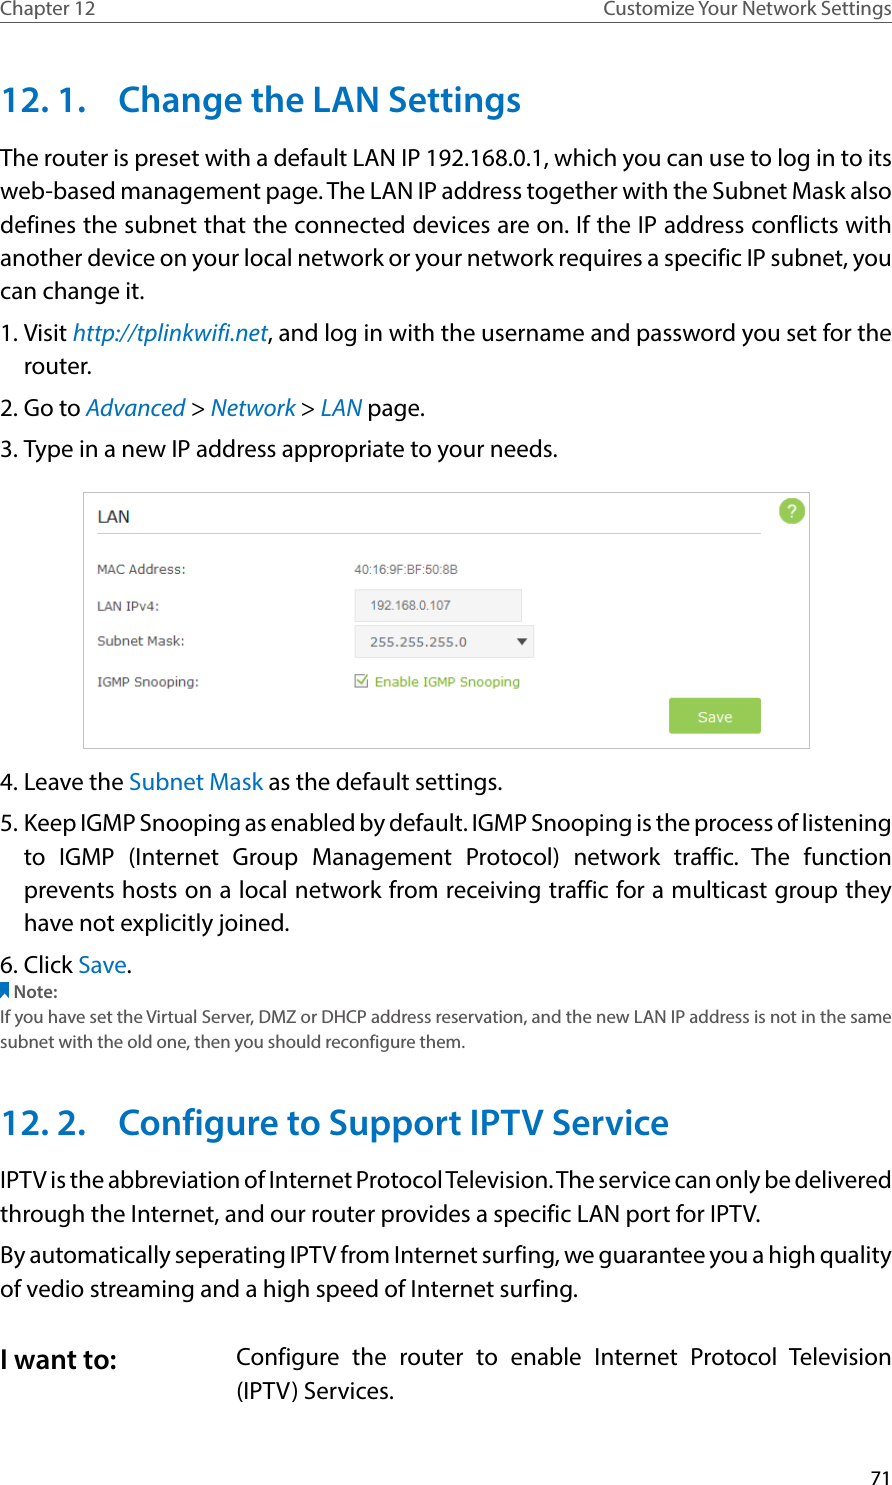 71Chapter 12 Customize Your Network Settings12. 1.  Change the LAN SettingsThe router is preset with a default LAN IP 192.168.0.1, which you can use to log in to its web-based management page. The LAN IP address together with the Subnet Mask also defines the subnet that the connected devices are on. If the IP address conflicts with another device on your local network or your network requires a specific IP subnet, you can change it.1. Visit http://tplinkwifi.net, and log in with the username and password you set for the router. 2. Go to Advanced &gt; Network &gt; LAN page. 3. Type in a new IP address appropriate to your needs. 4. Leave the Subnet Mask as the default settings. 5. Keep IGMP Snooping as enabled by default. IGMP Snooping is the process of listening to IGMP (Internet Group Management Protocol) network traffic. The function prevents hosts on a local network from receiving traffic for a multicast group they have not explicitly joined. 6. Click Save. Note:If you have set the Virtual Server, DMZ or DHCP address reservation, and the new LAN IP address is not in the same subnet with the old one, then you should reconfigure them.12. 2.  Configure to Support IPTV ServiceIPTV is the abbreviation of Internet Protocol Television. The service can only be delivered through the Internet, and our router provides a specific LAN port for IPTV. By automatically seperating IPTV from Internet surfing, we guarantee you a high quality of vedio streaming and a high speed of Internet surfing. Configure the router to enable Internet Protocol Television (IPTV) Services.I want to: